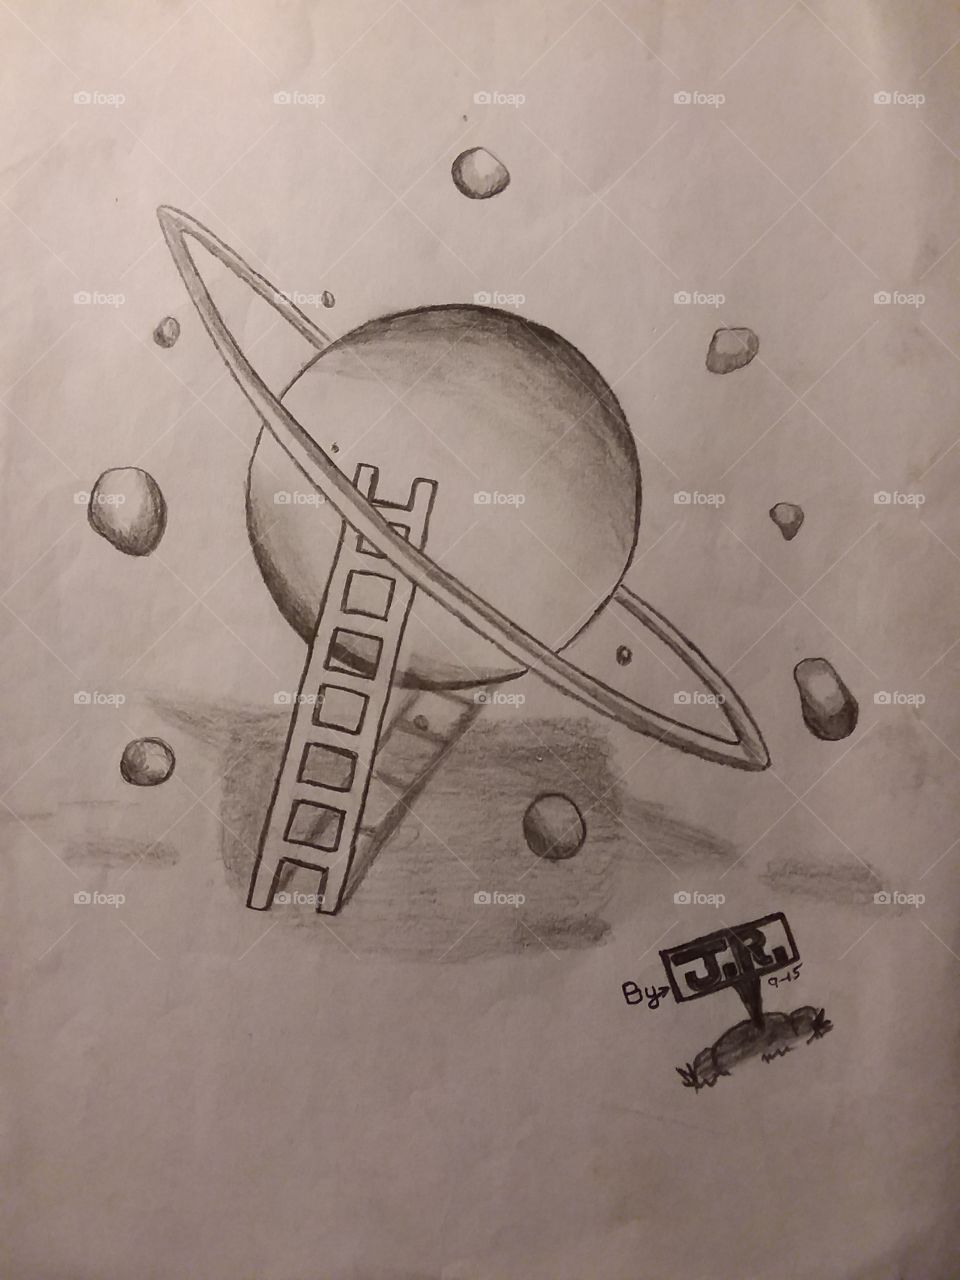 My Pencil Drawings; Ladder to Saturn